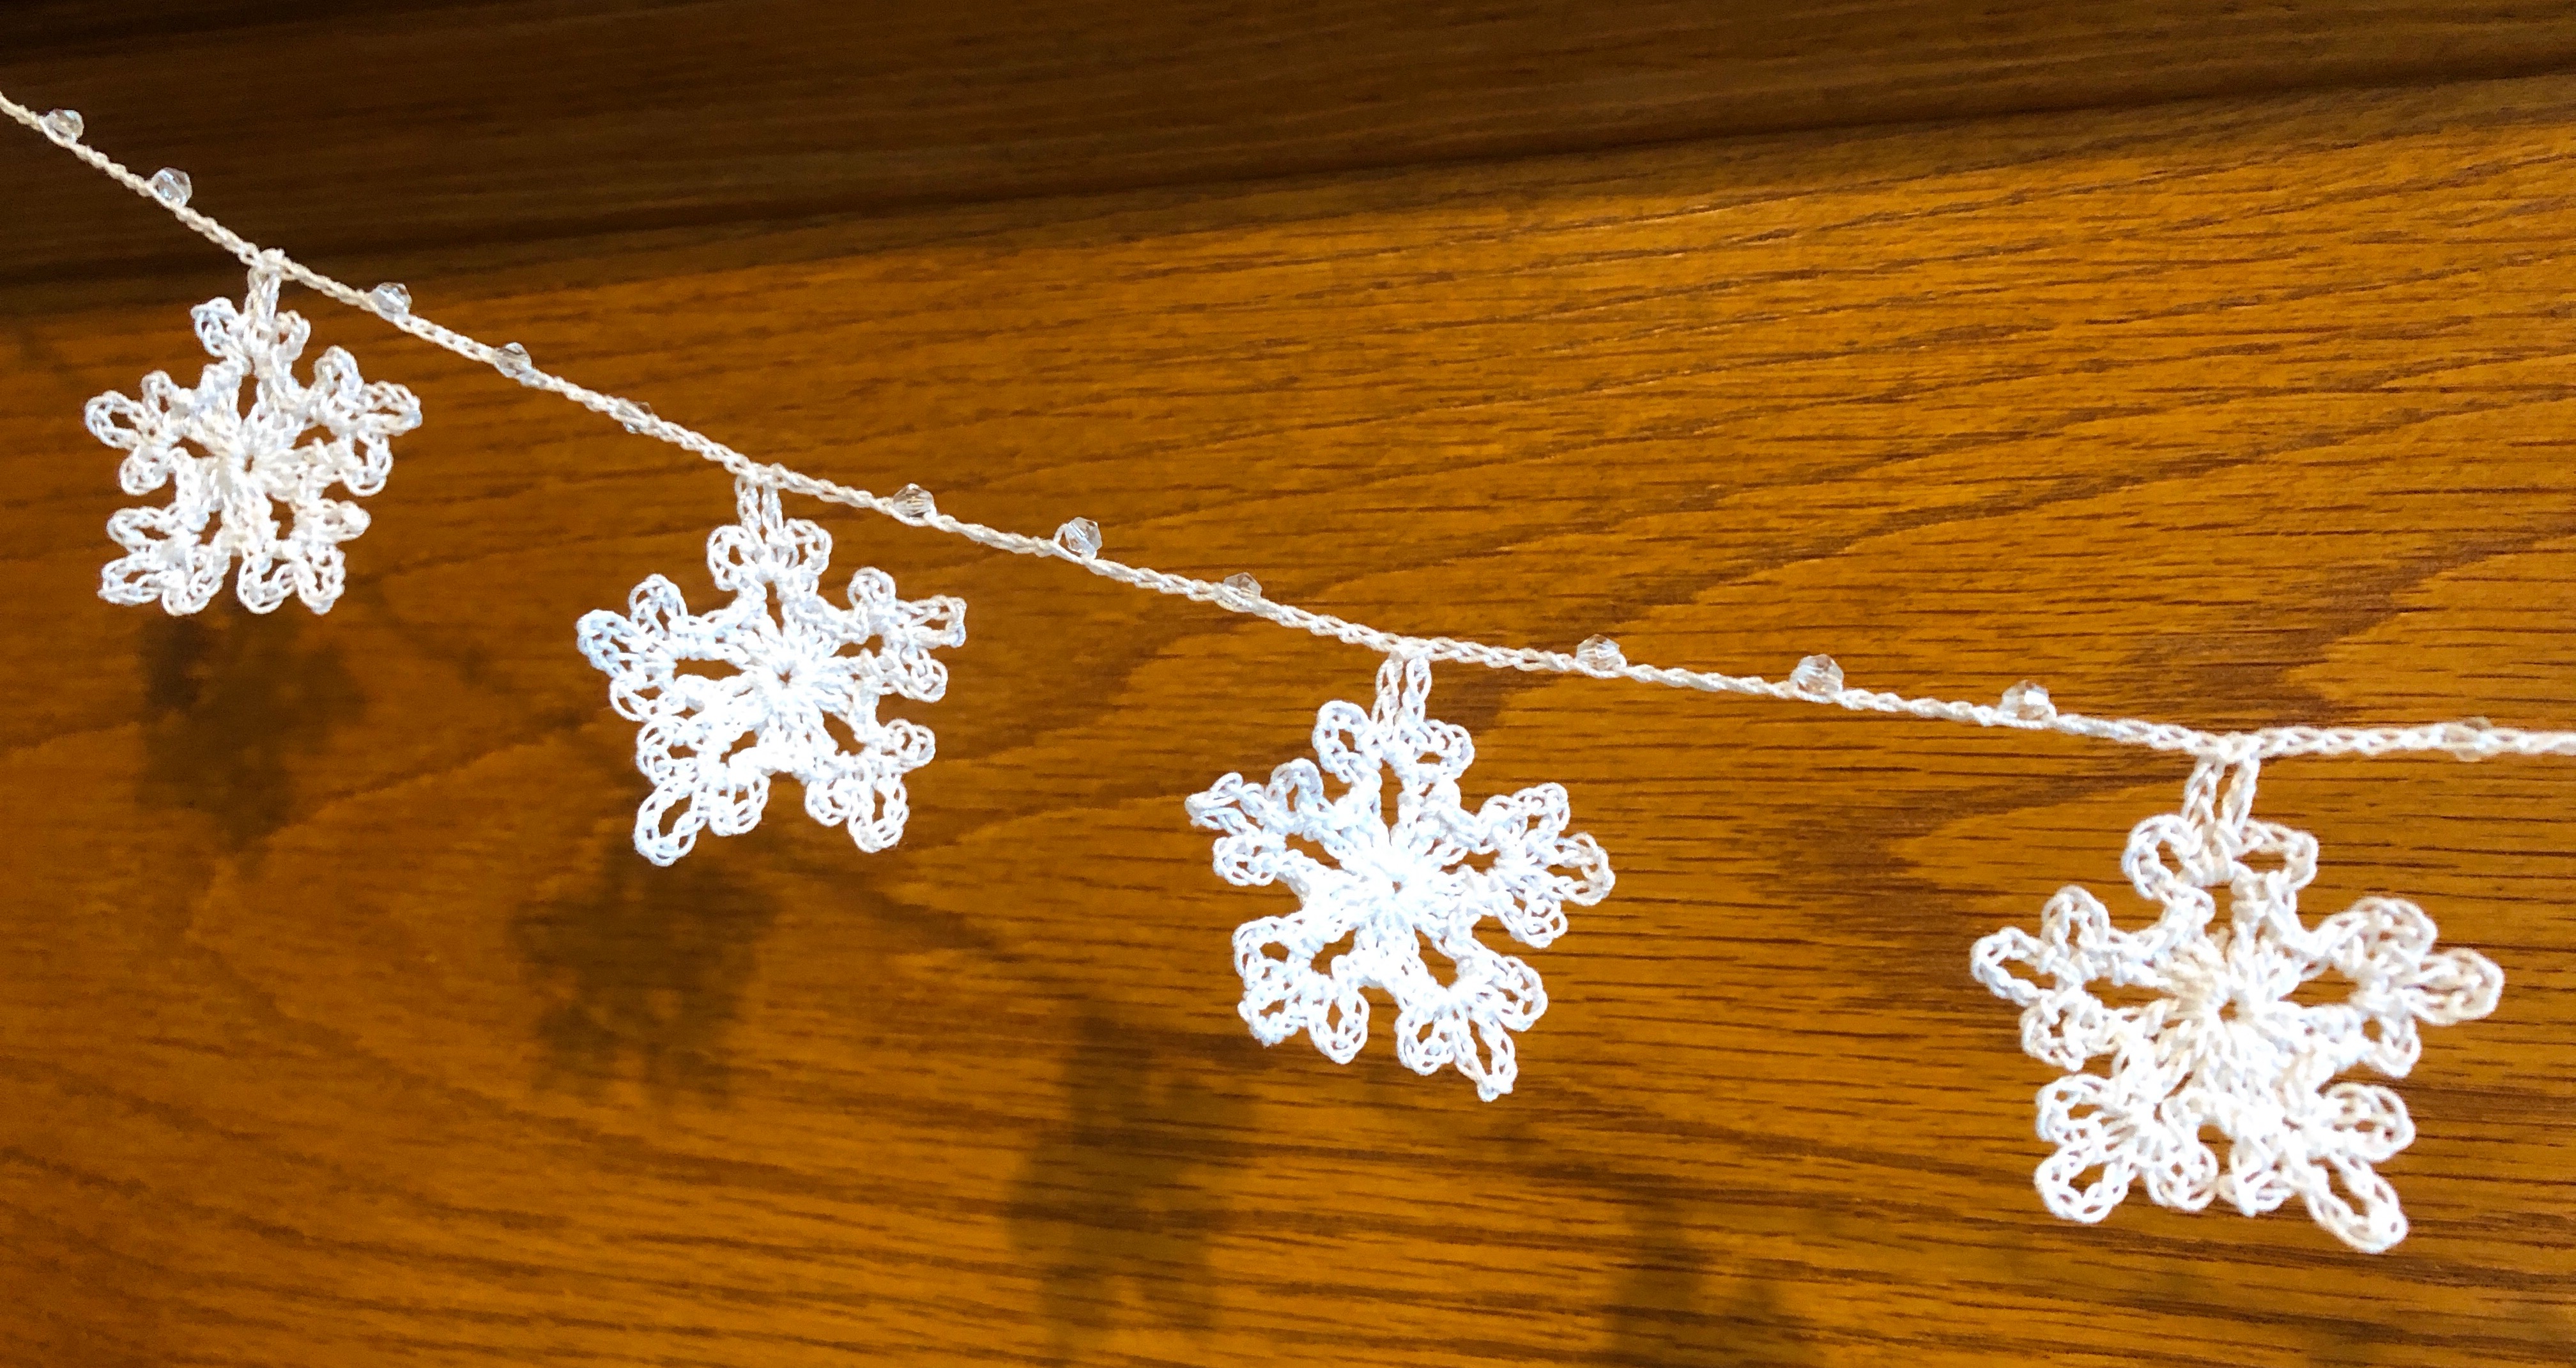 Handmade, crocheted, white cotton snowflakes and clear crystal style bead garland.